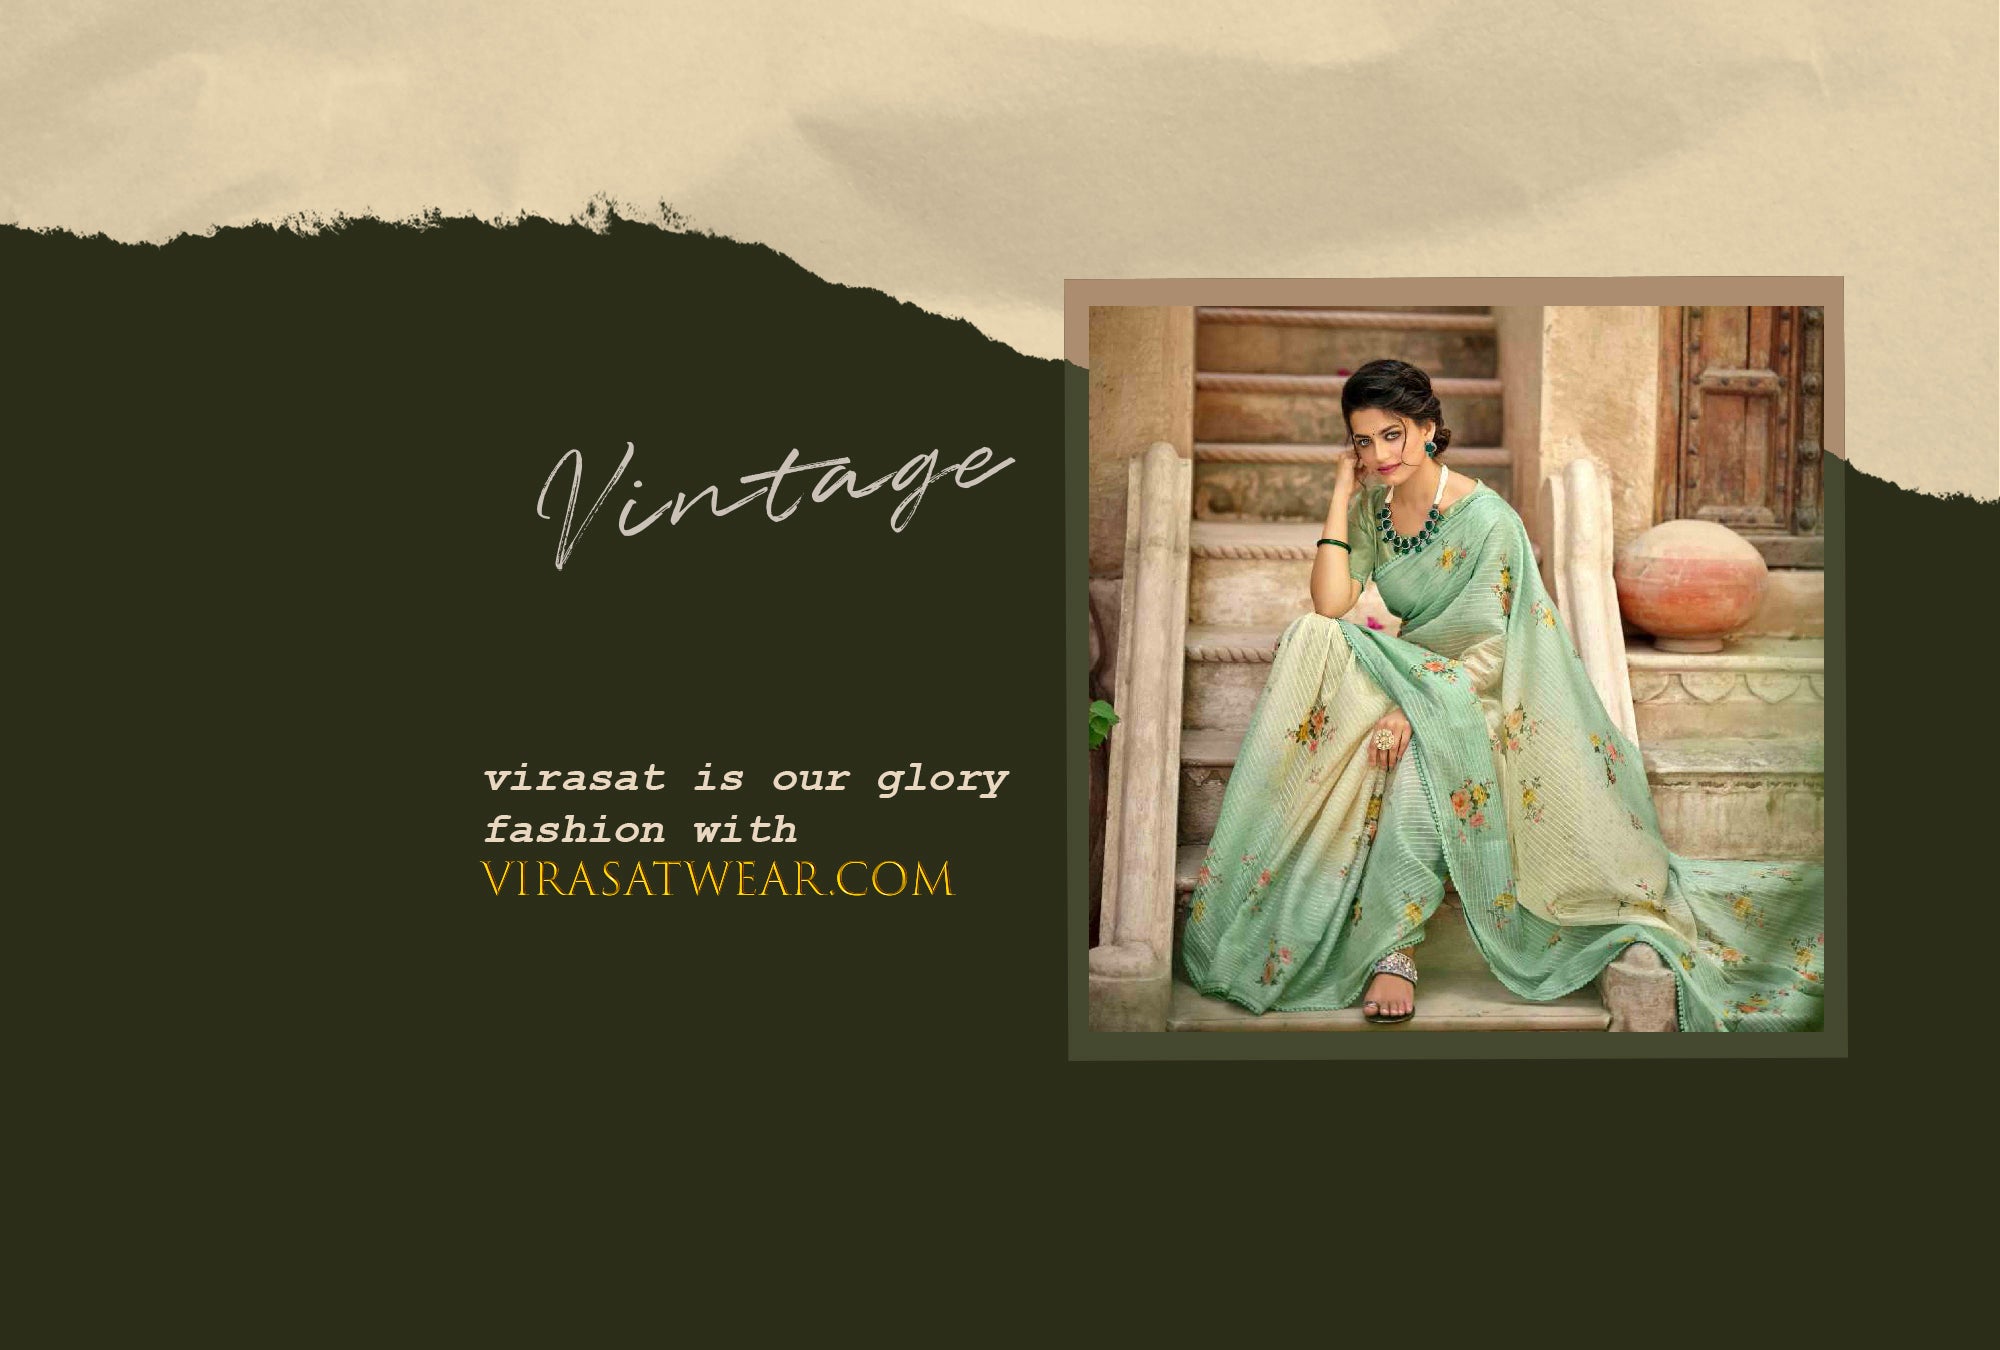 poster design showing sarees vintage collection.